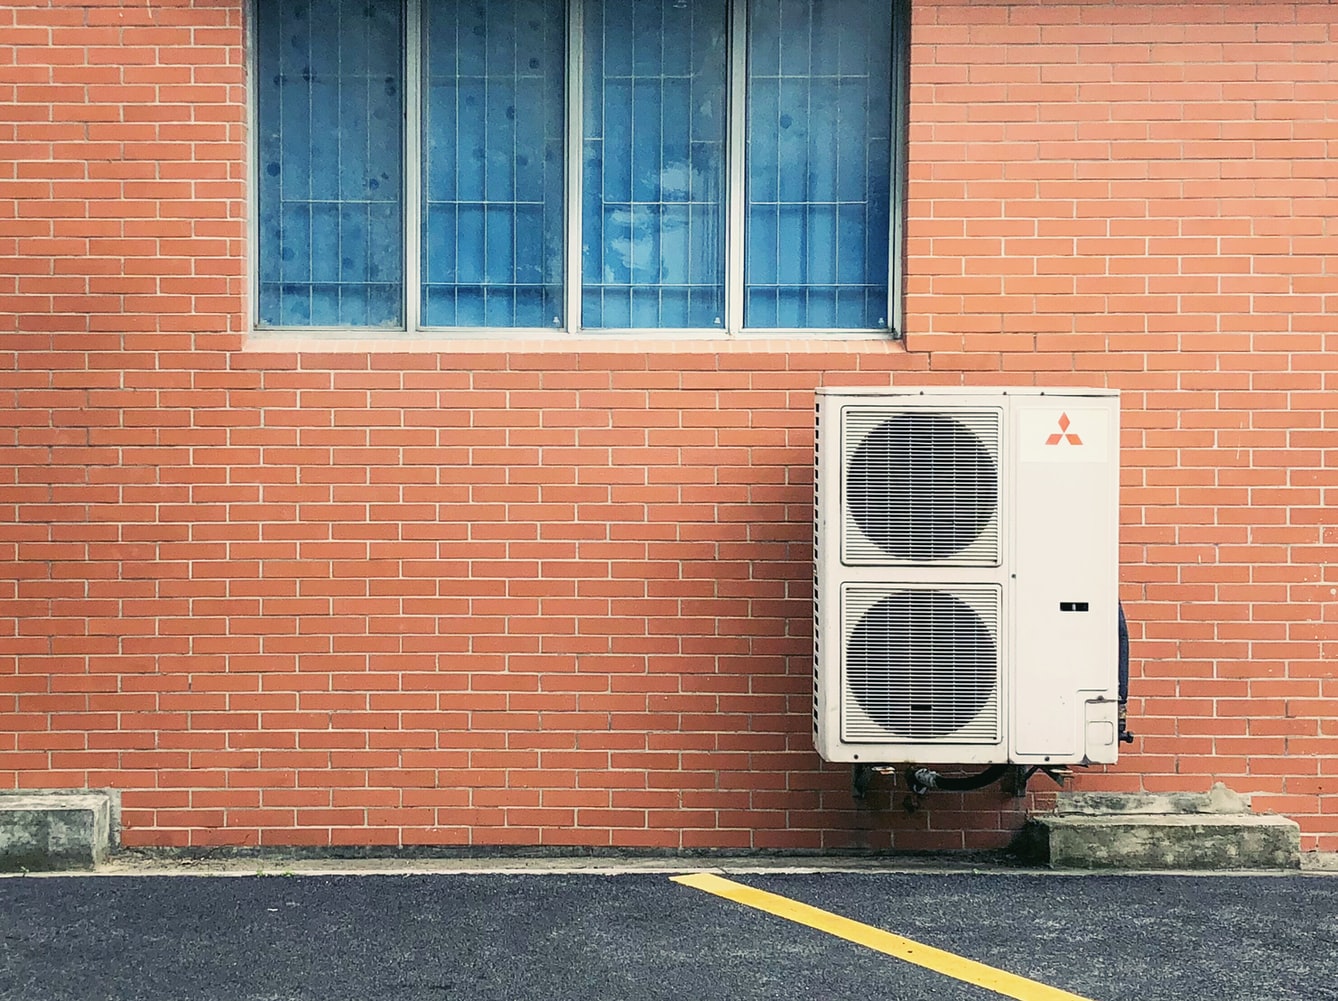 An Air Conditioner Mounted On A Brick Wall On The Sunshine Coast